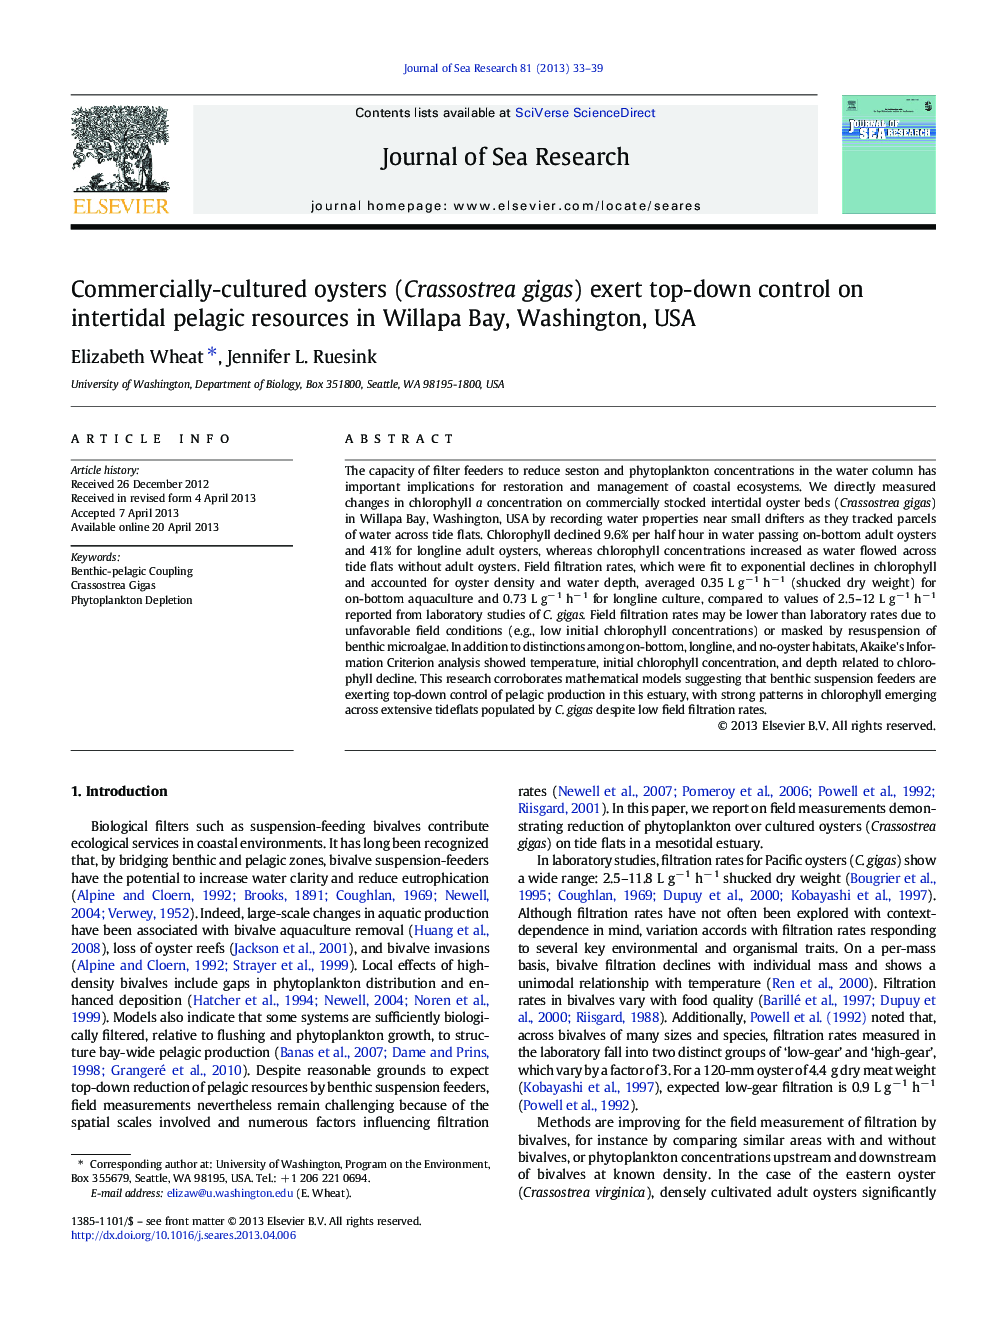 Commercially-cultured oysters (Crassostrea gigas) exert top-down control on intertidal pelagic resources in Willapa Bay, Washington, USA